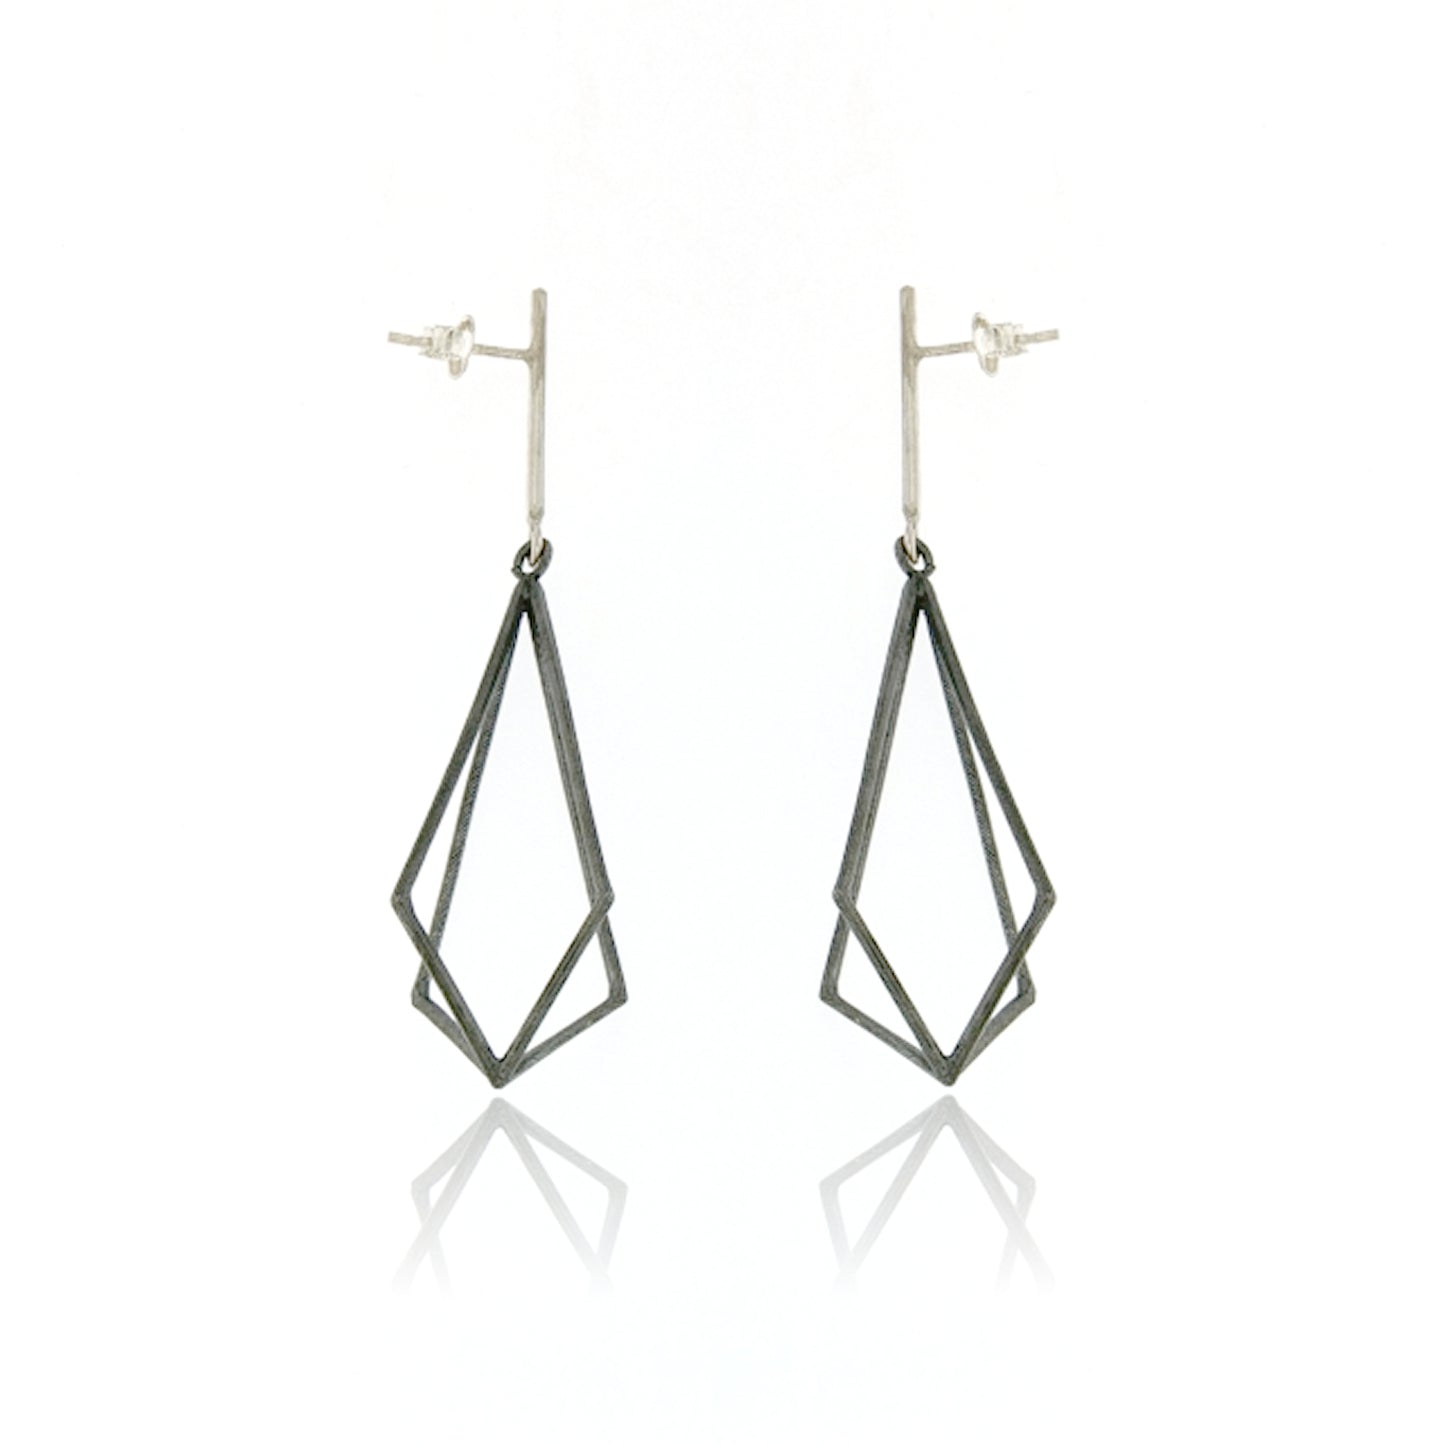 Mysterium Collection Oxidized Sterling Kite Earrings